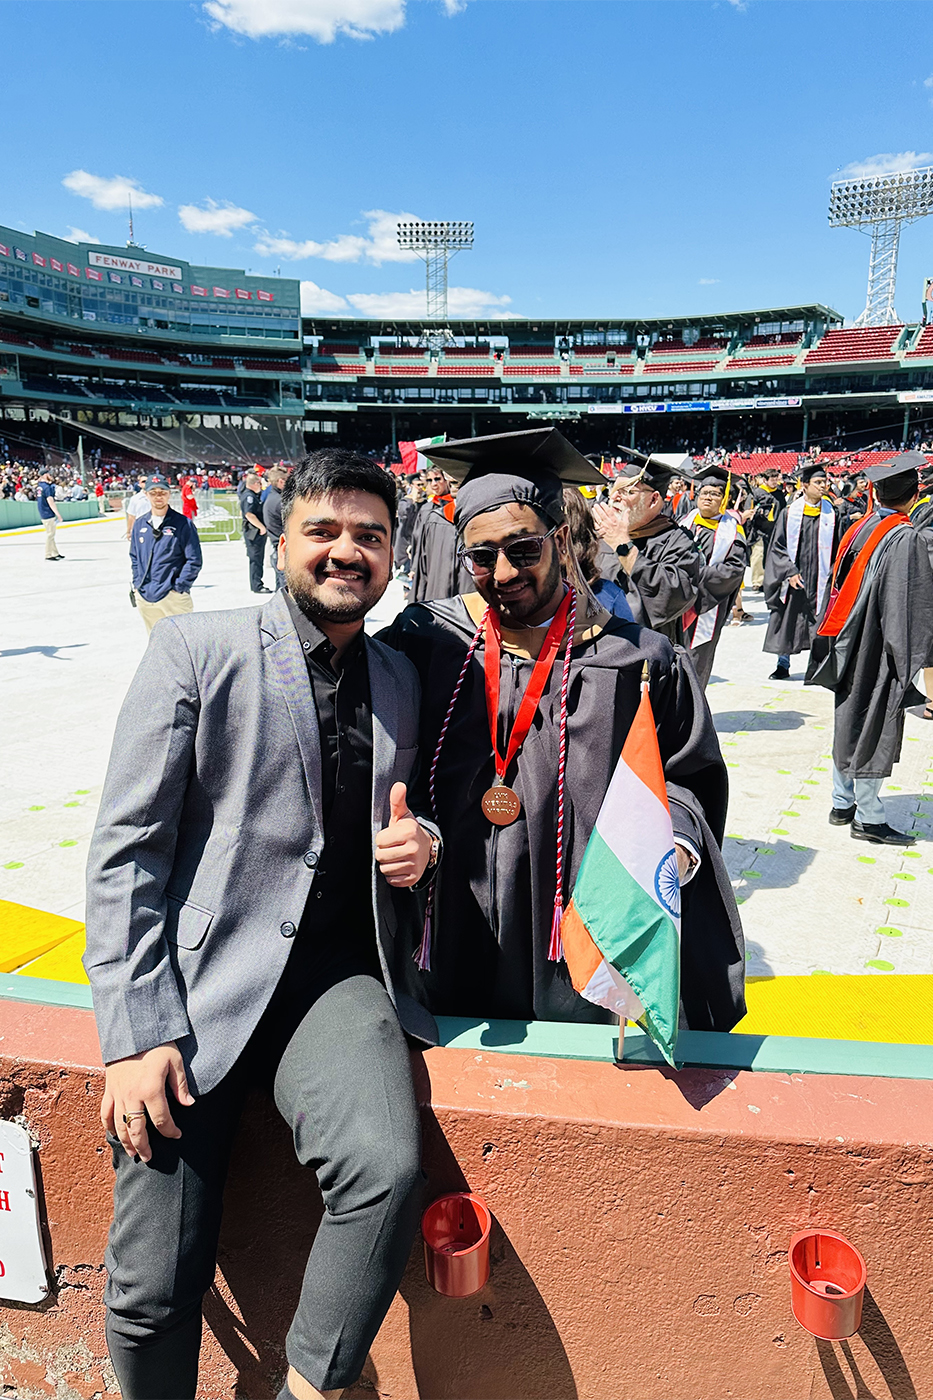 Pulkit and Hardik posing for a photo in Fenway park